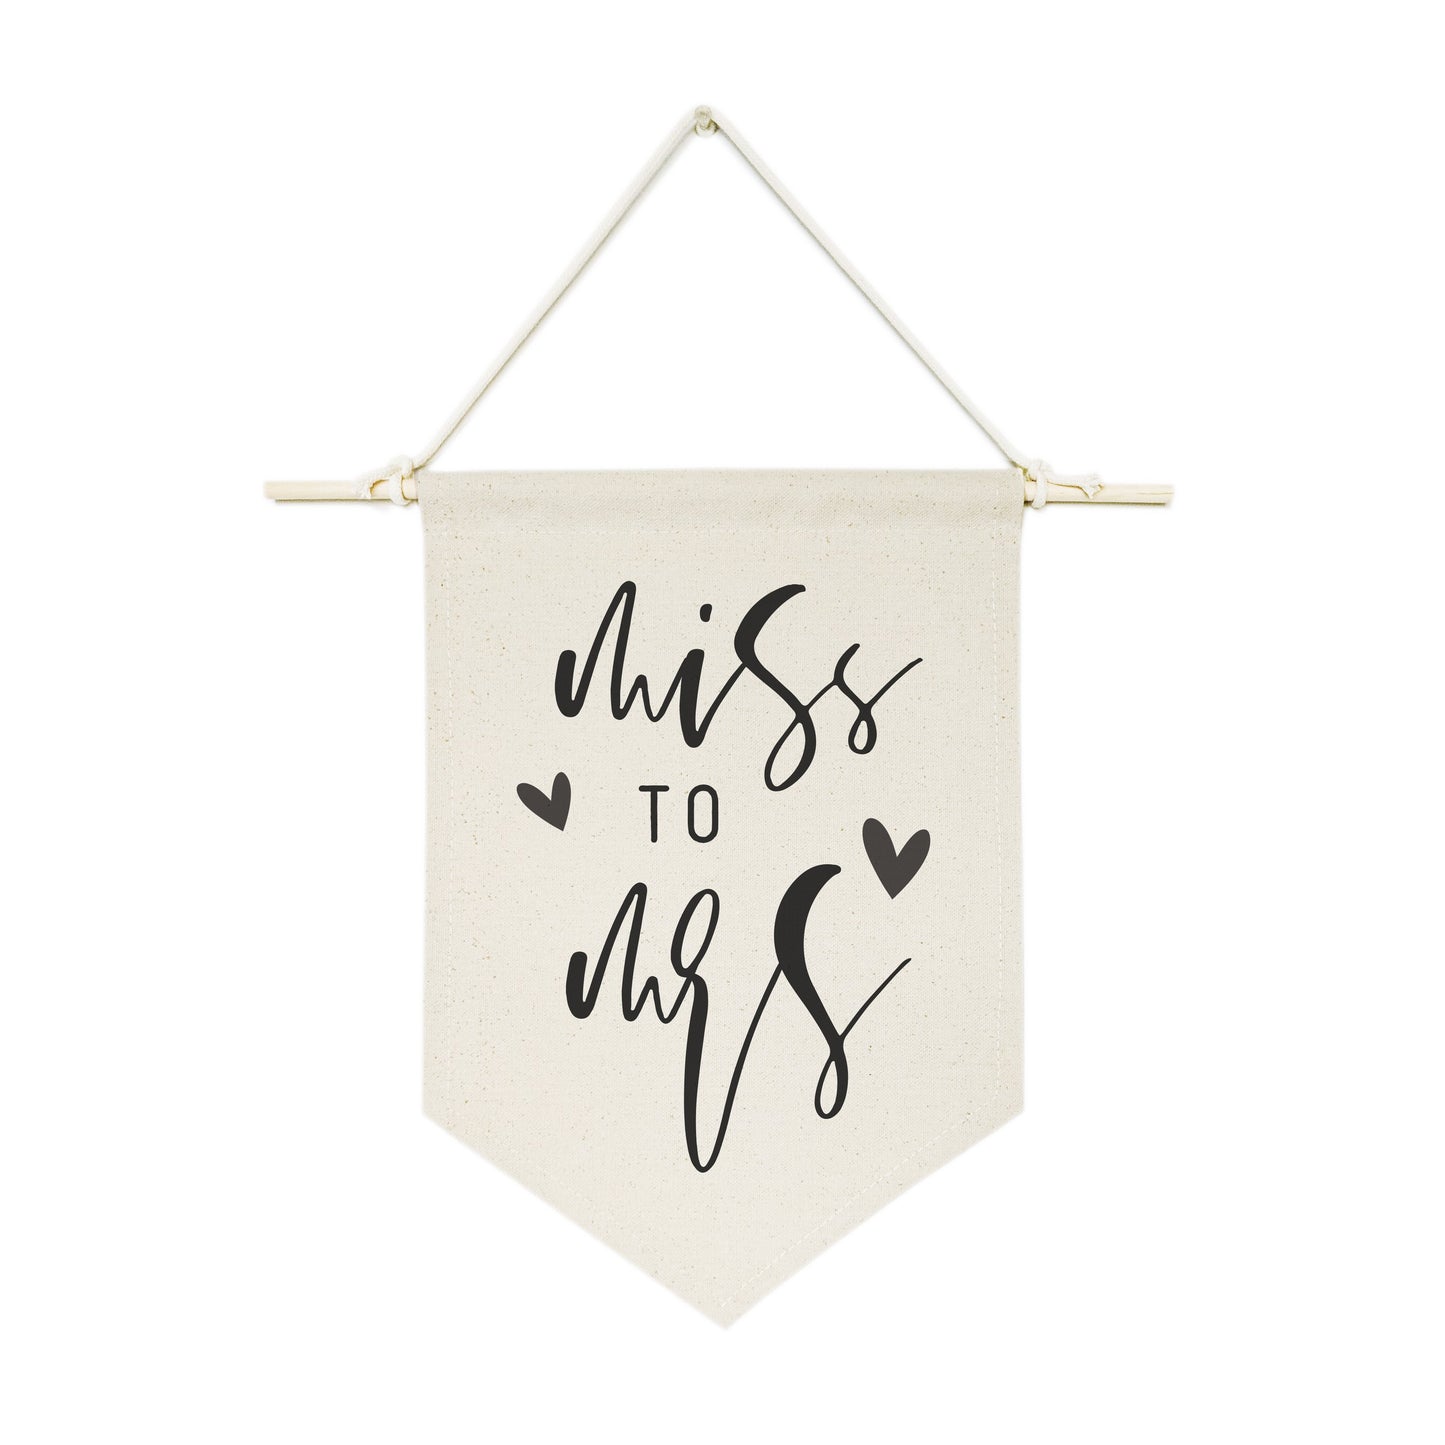 Miss to Mrs. Hanging Wall Banner